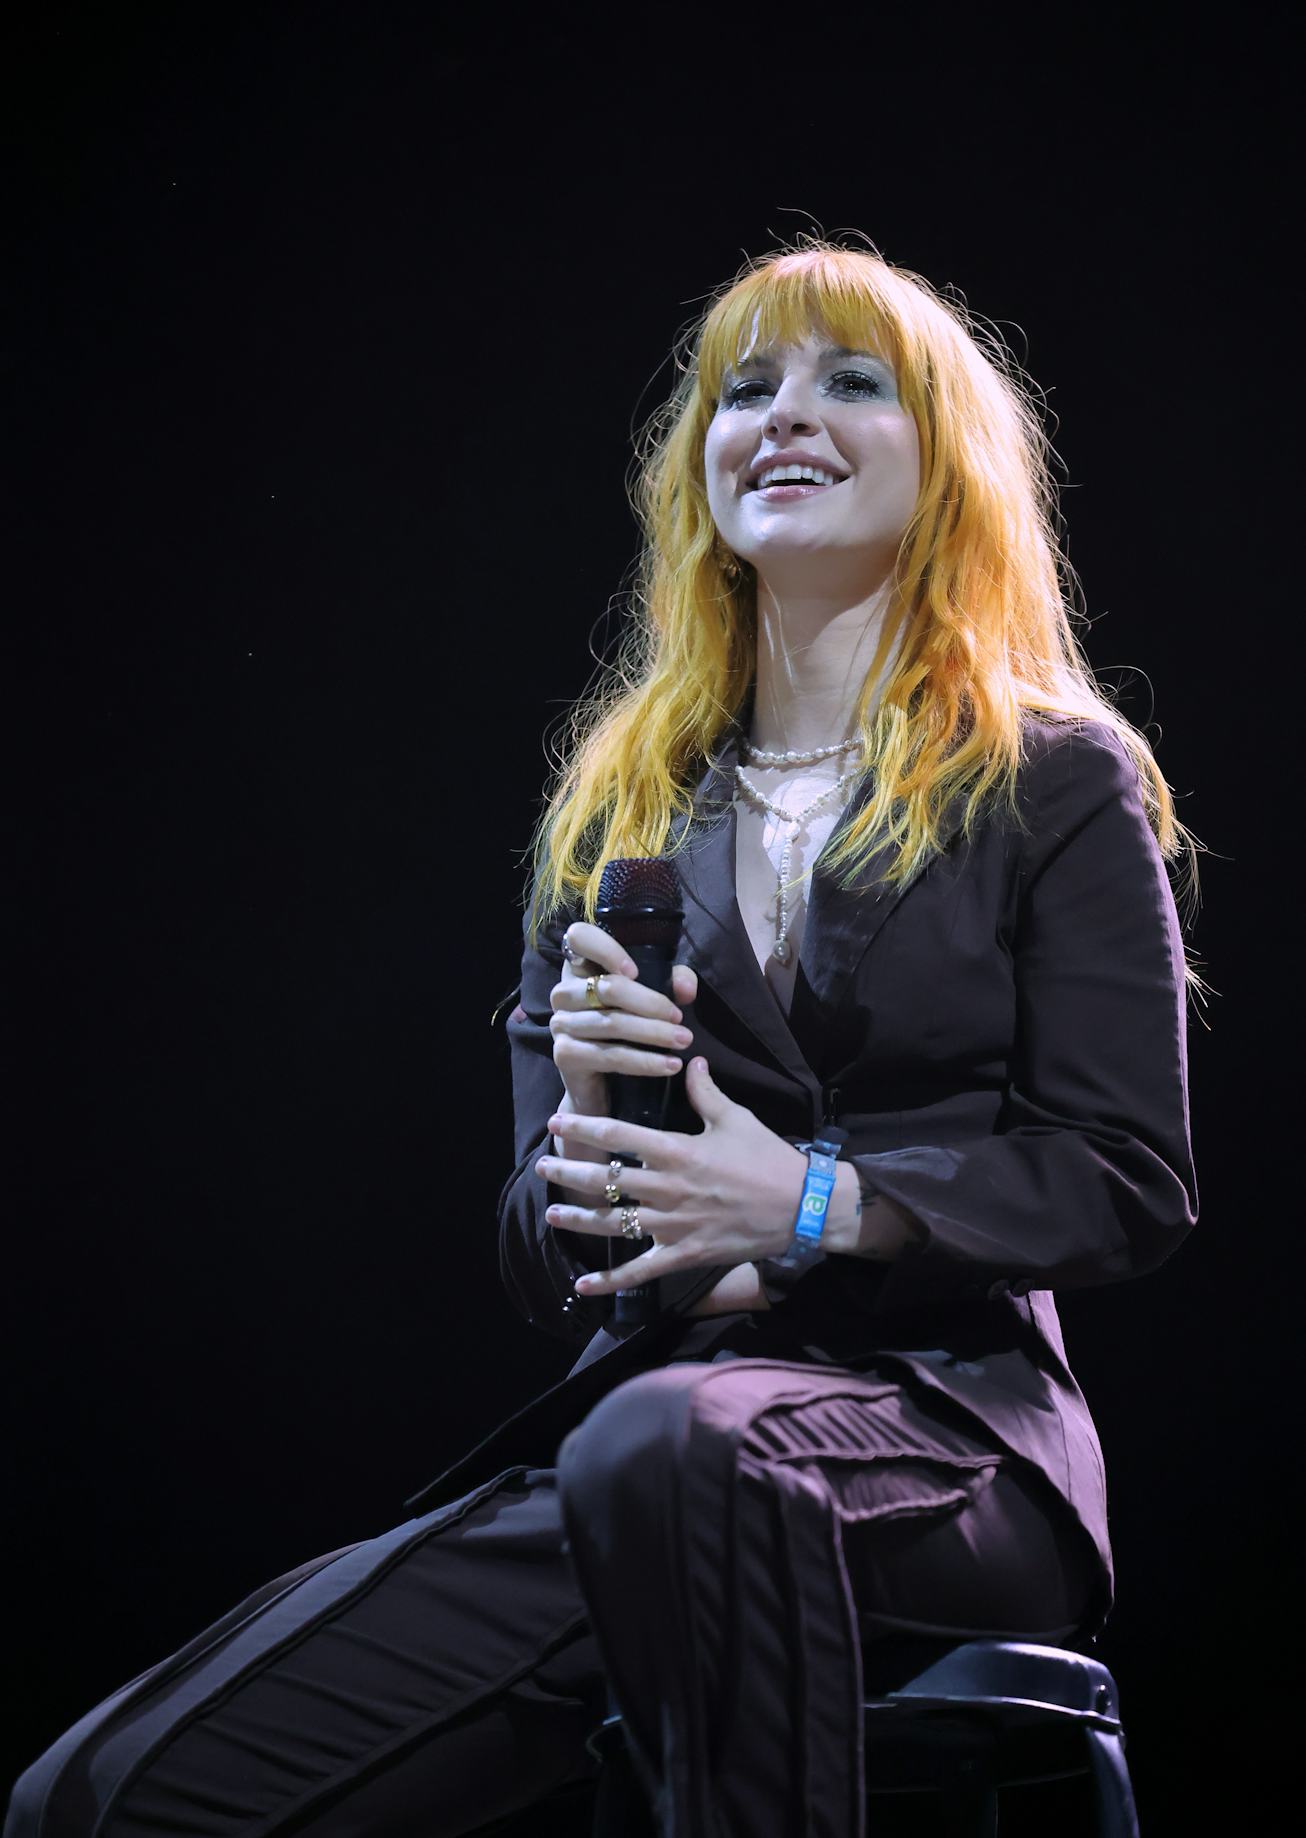 INDIO, CALIFORNIA - APRIL 23: Hayley Williams performs with Billie Eilish on the Coachella stage dur...